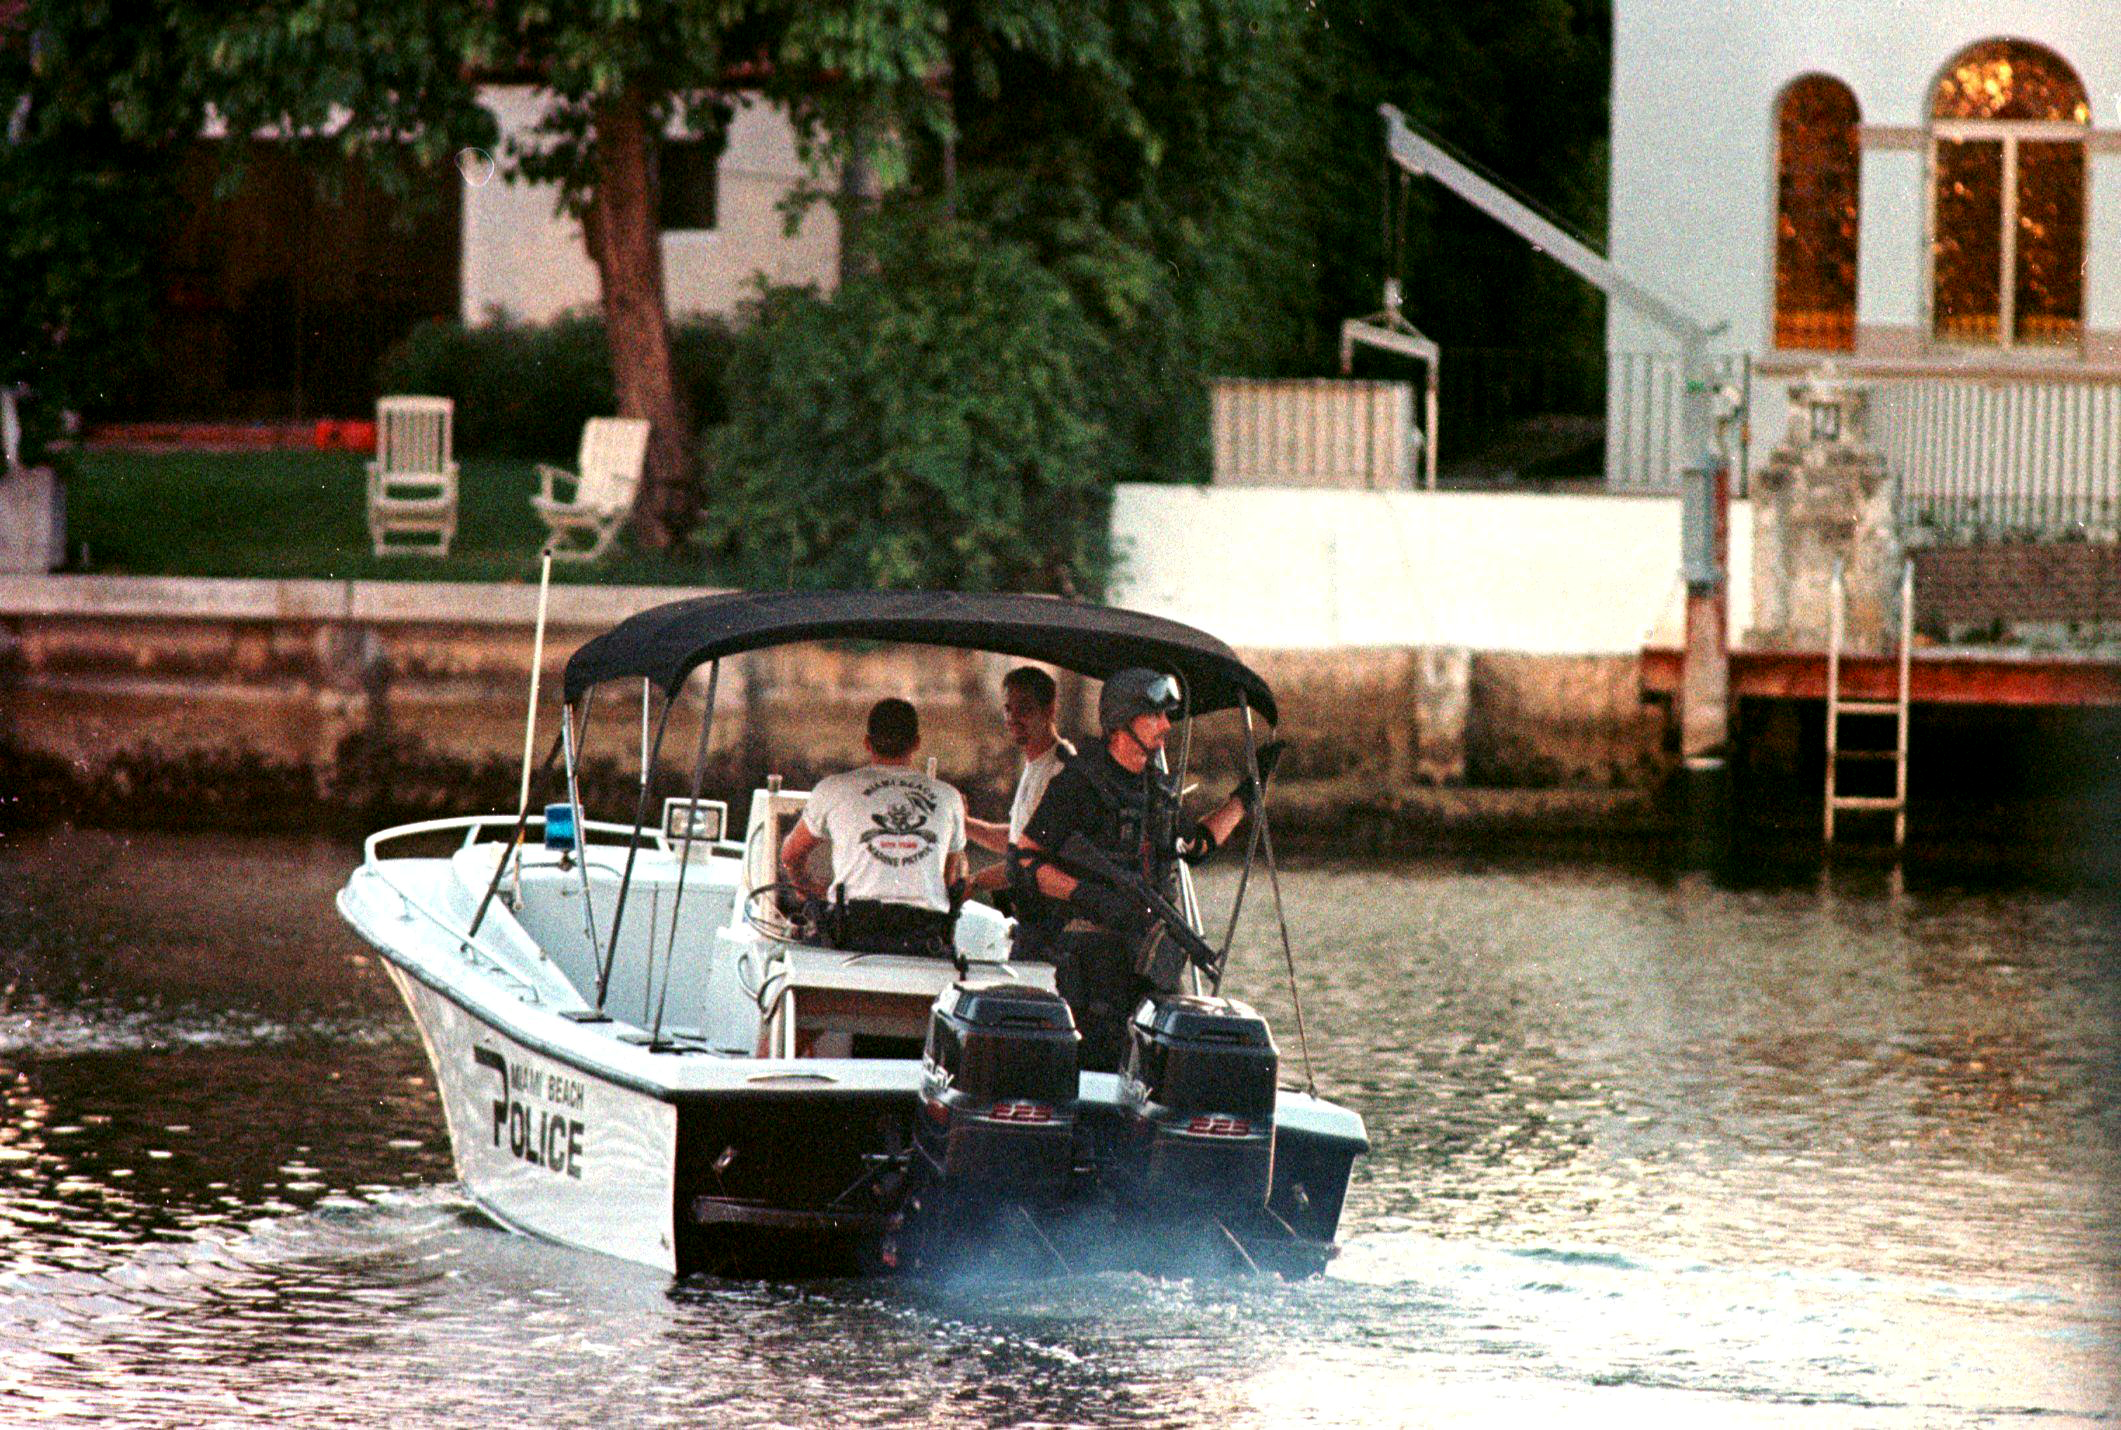 PHOTO: A member of the Miami Beach police SWAT team patrols a canal in the vicinity of a houseboat in Miami Beach, Fla., July 23, 1997, after it was reported that an unknown person was seen inside by the houseboat's caretaker.